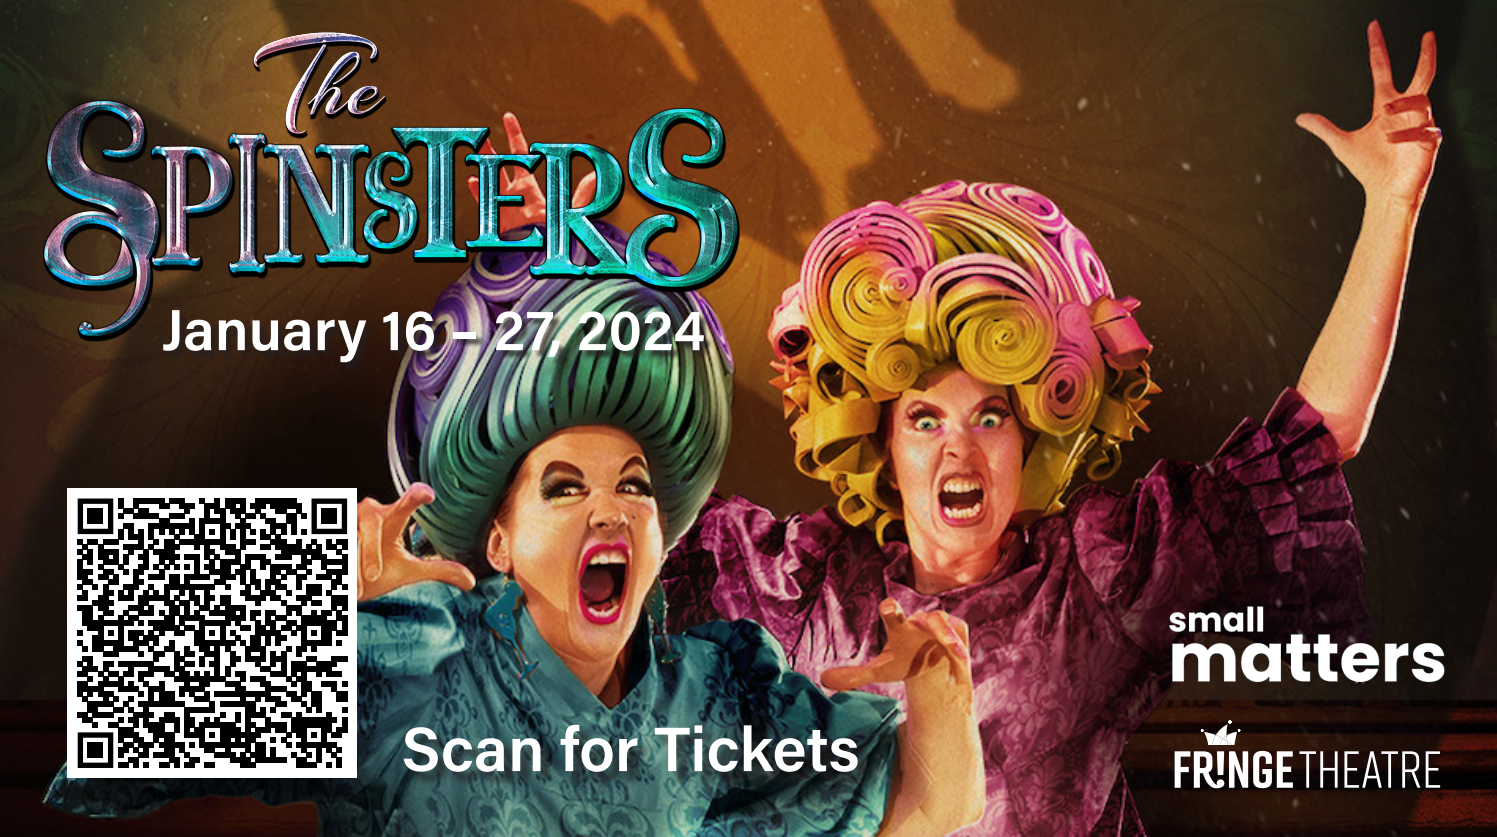 The Spinsters promo header.